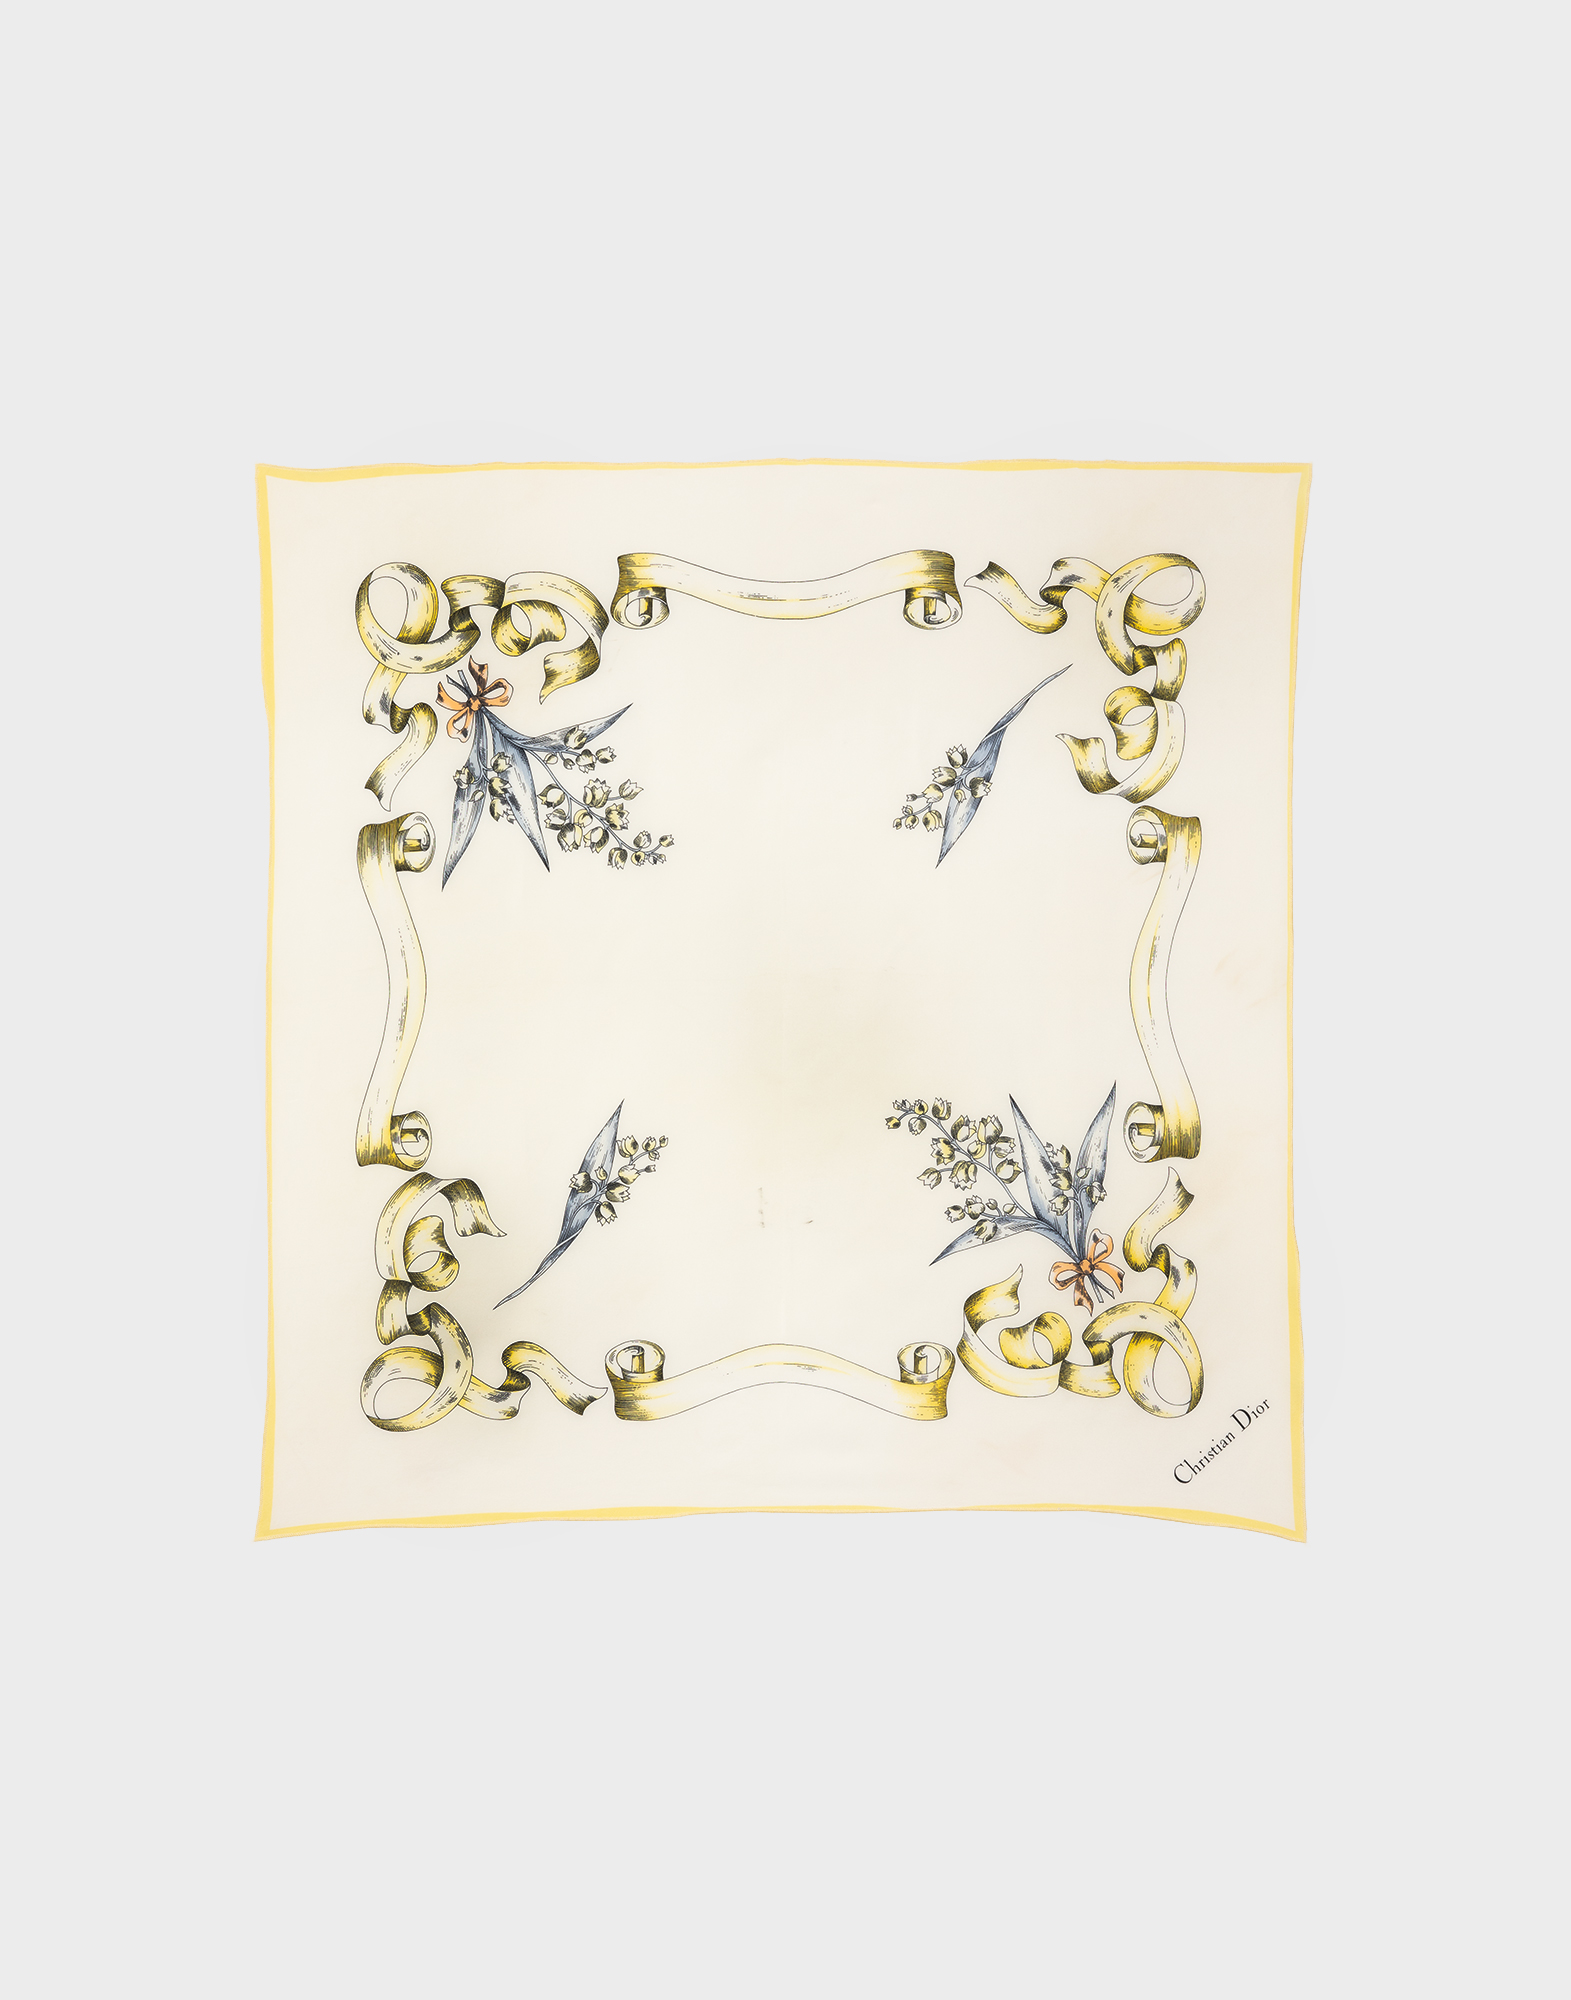 Square silk handkerchief in ivory and yellow with bows and ribbons.